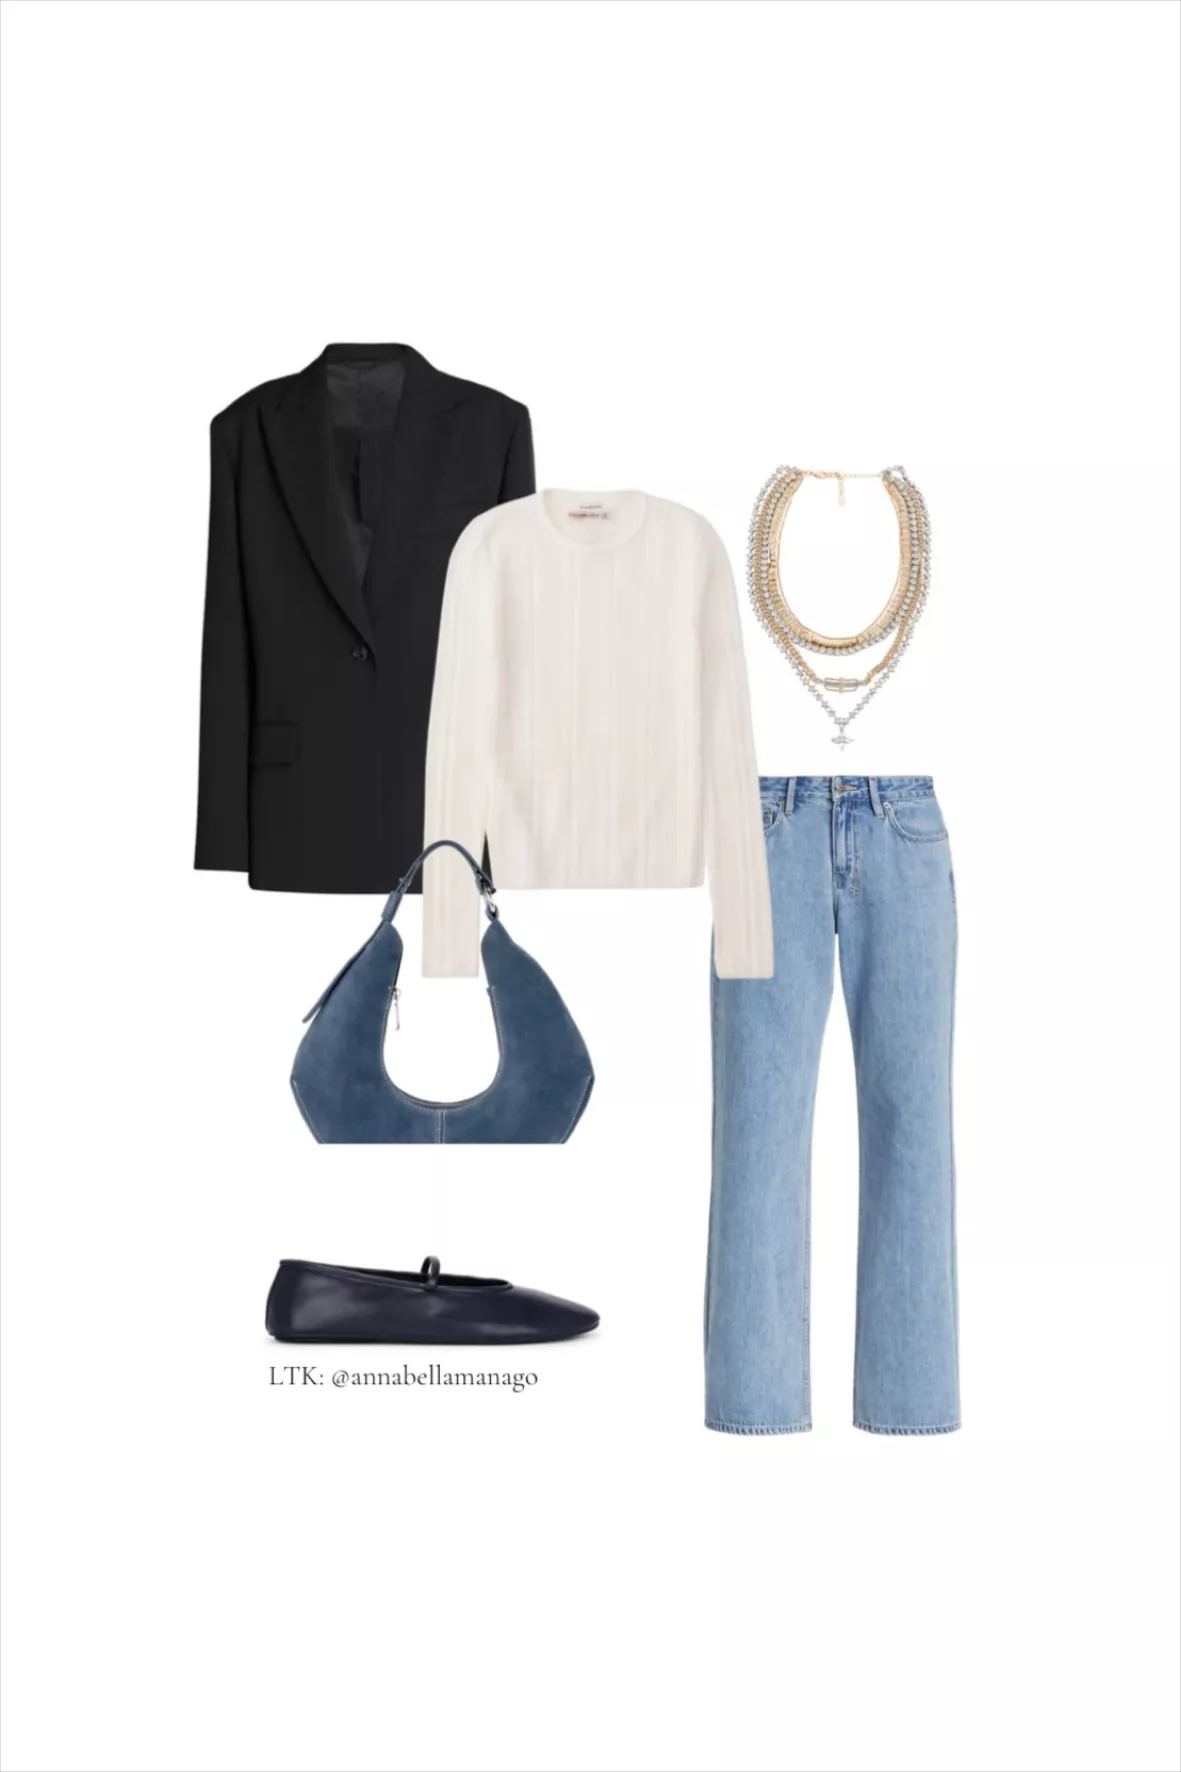 Matilda djerf hair outfit bag  Casual outfits, Stockholm fashion